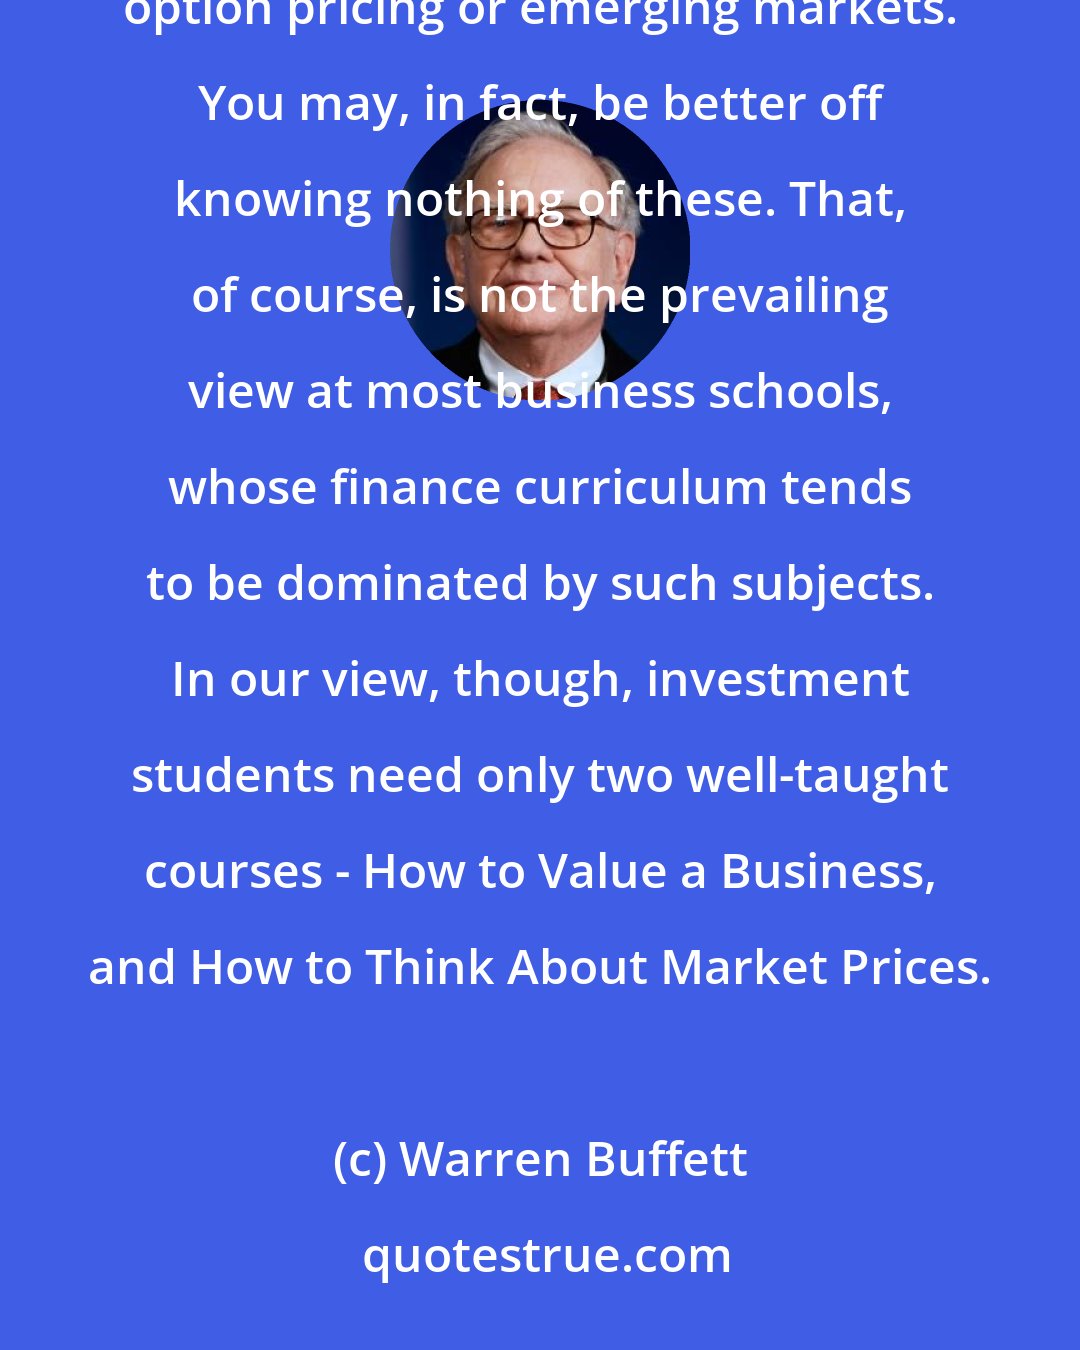 Warren Buffett: To invest successfully, you need not understand beta, efficient markets, modern portfolio theory, option pricing or emerging markets. You may, in fact, be better off knowing nothing of these. That, of course, is not the prevailing view at most business schools, whose finance curriculum tends to be dominated by such subjects. In our view, though, investment students need only two well-taught courses - How to Value a Business, and How to Think About Market Prices.